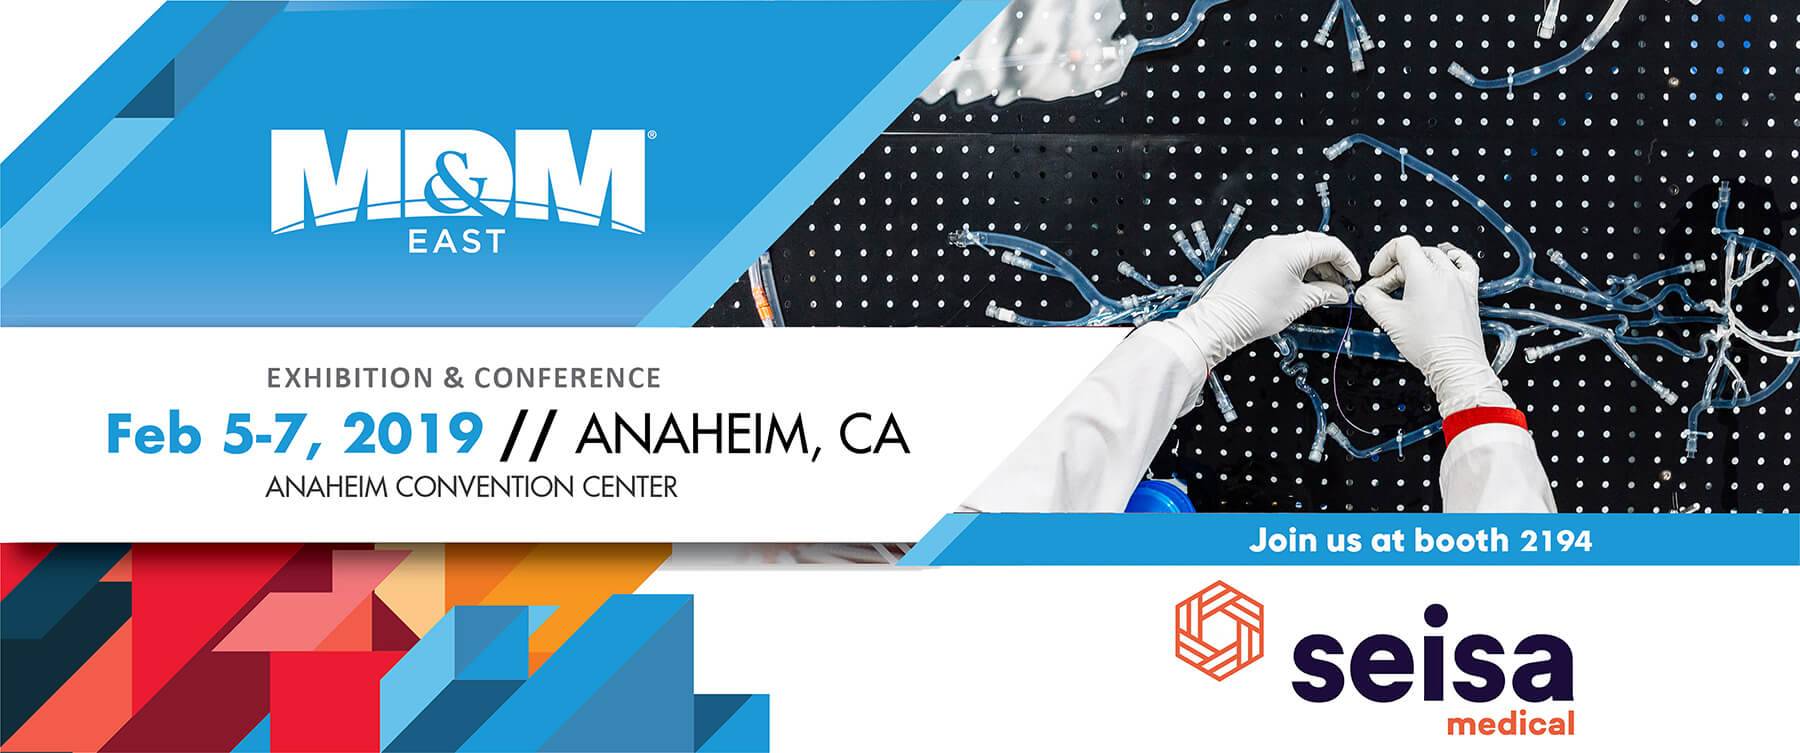 Seisa will be exhibiting in Anaheim MD&M West 2019